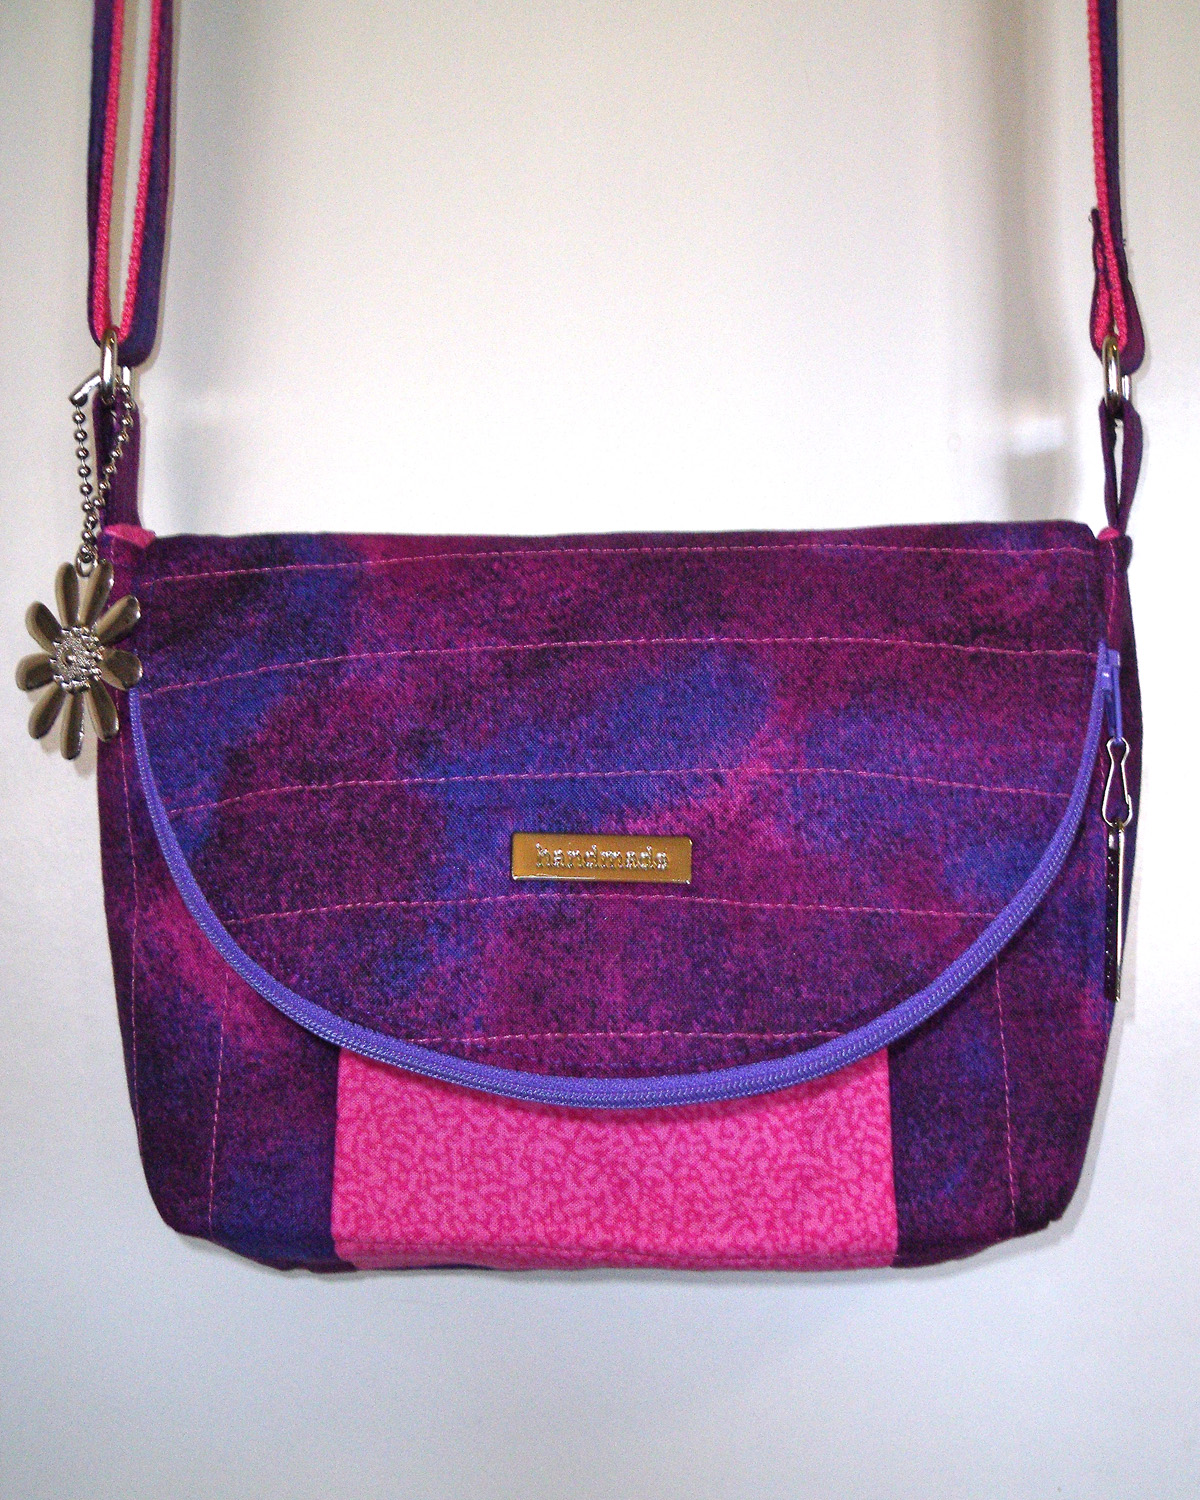 Emmaline Bags: Sewing Patterns and Purse Supplies: The Manhattan Bag ...